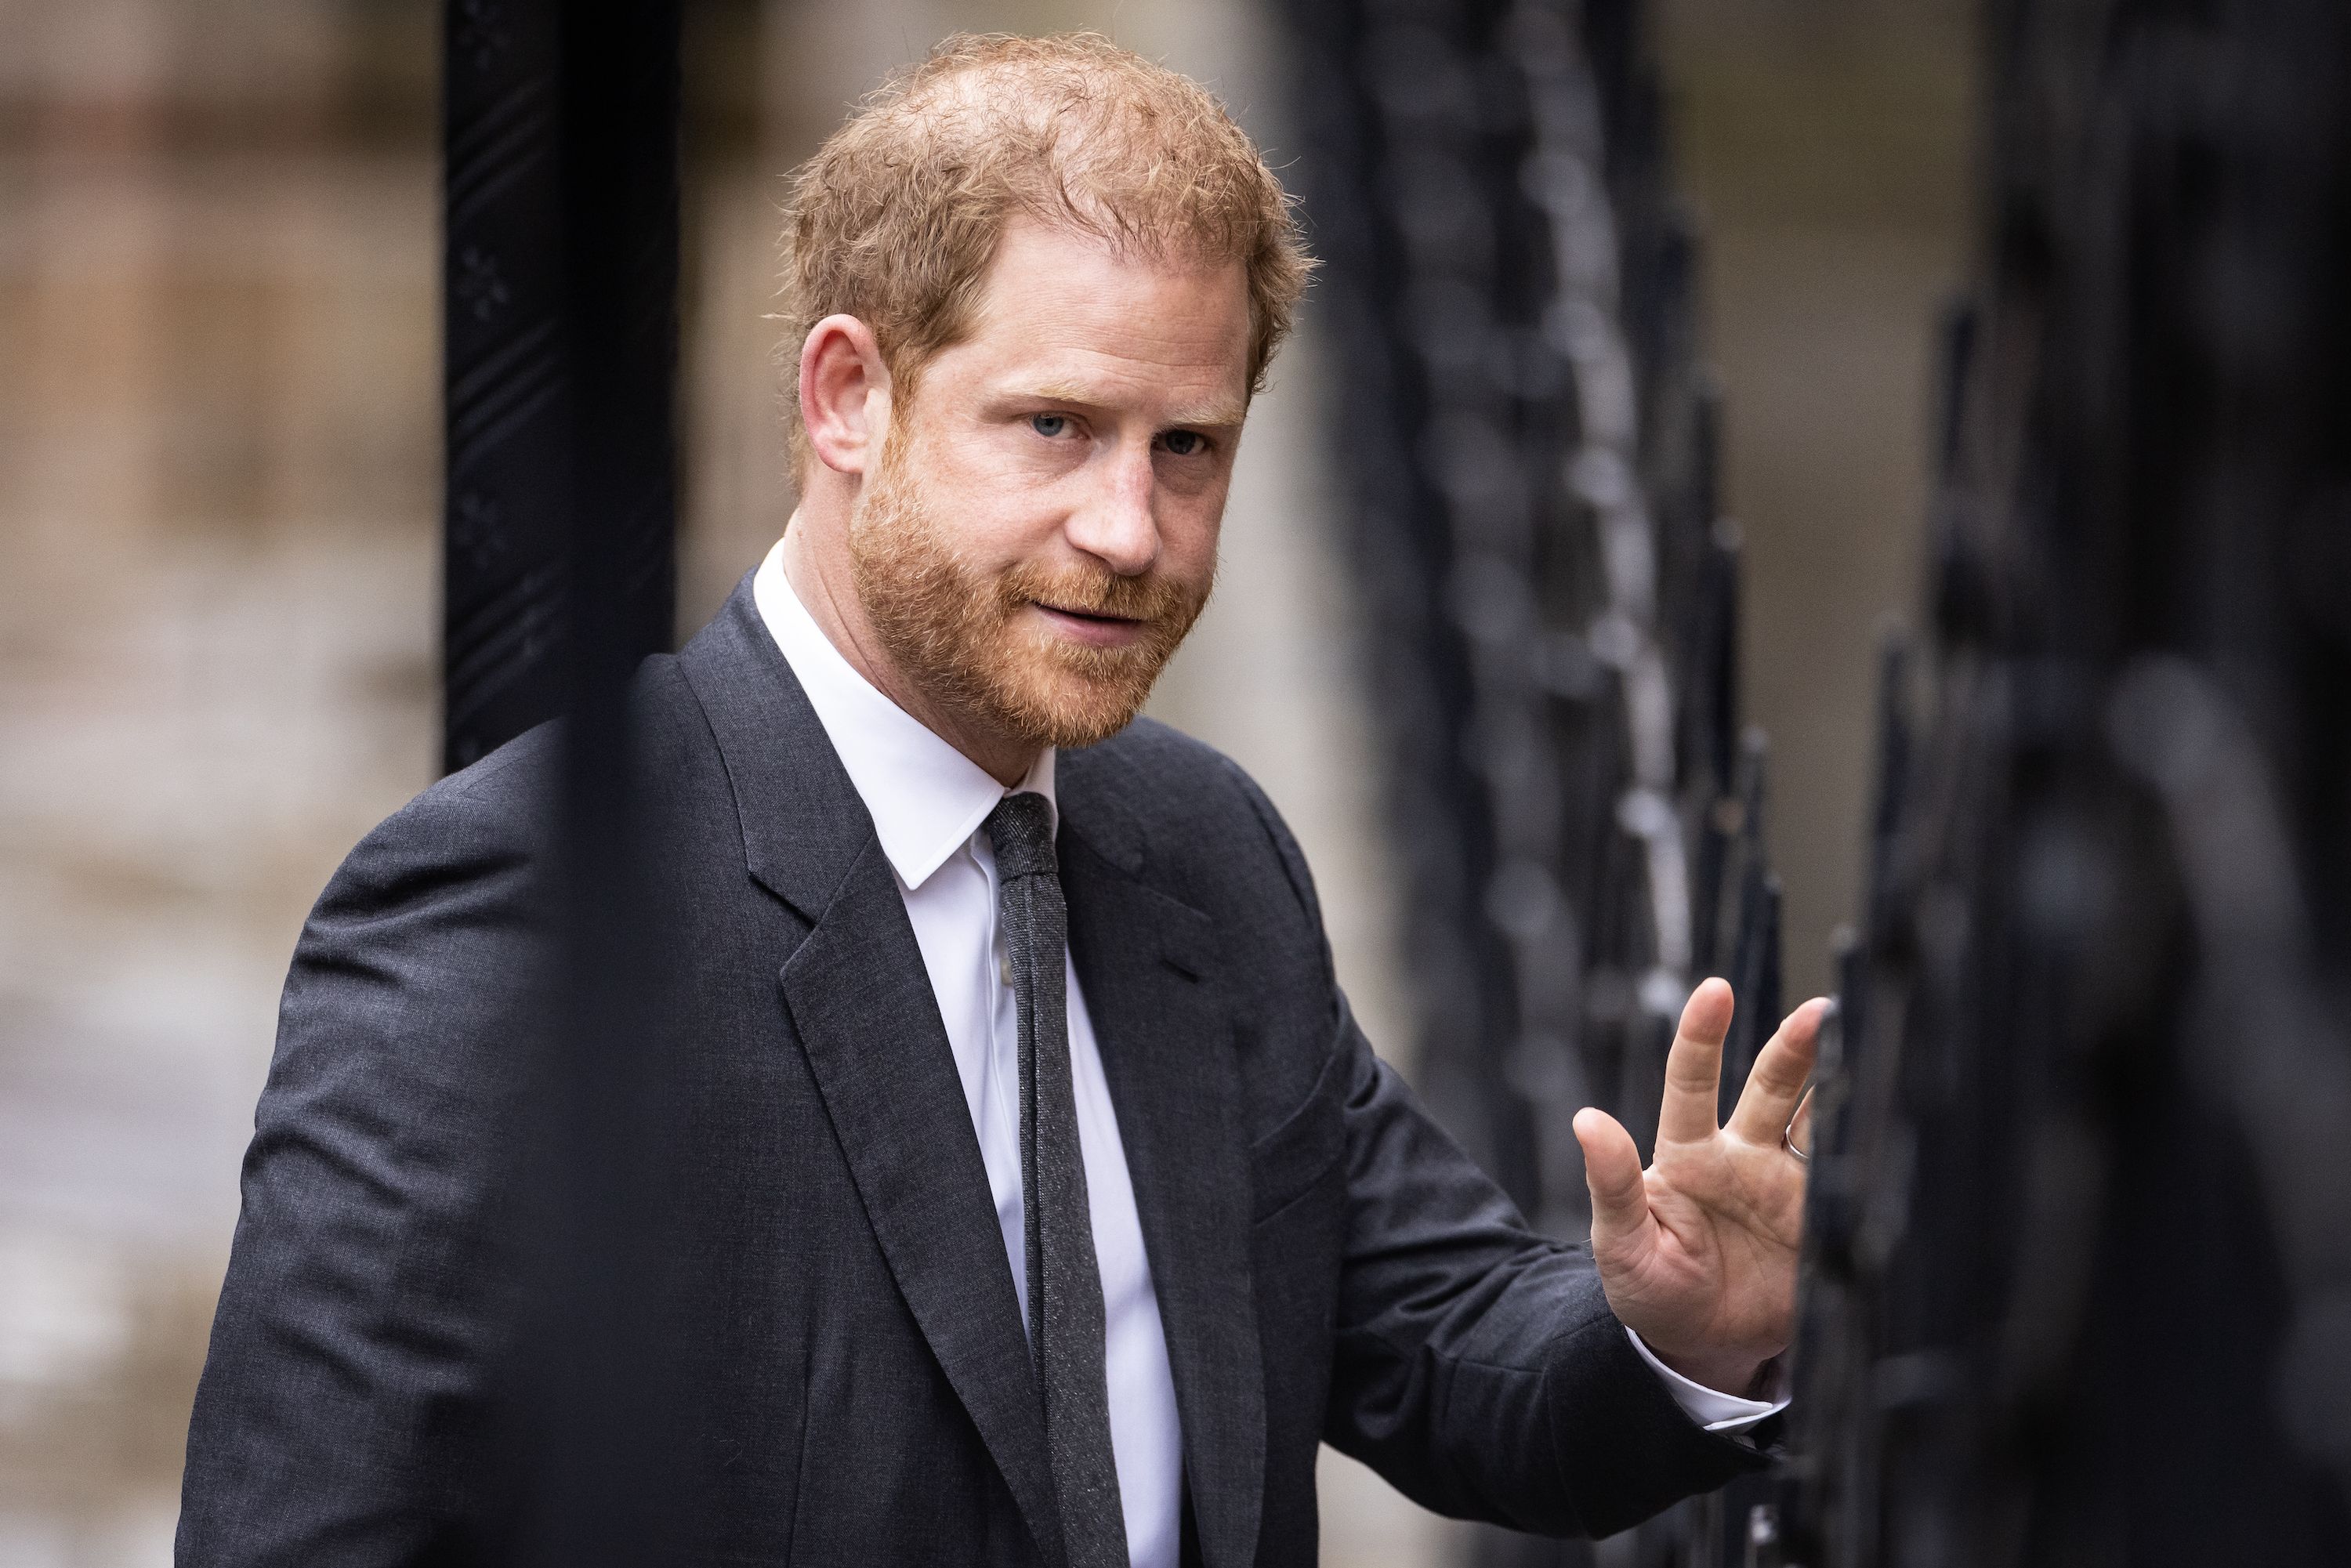 Prince Harry Drops A Bombshell - Prince William Relationship With UK Media